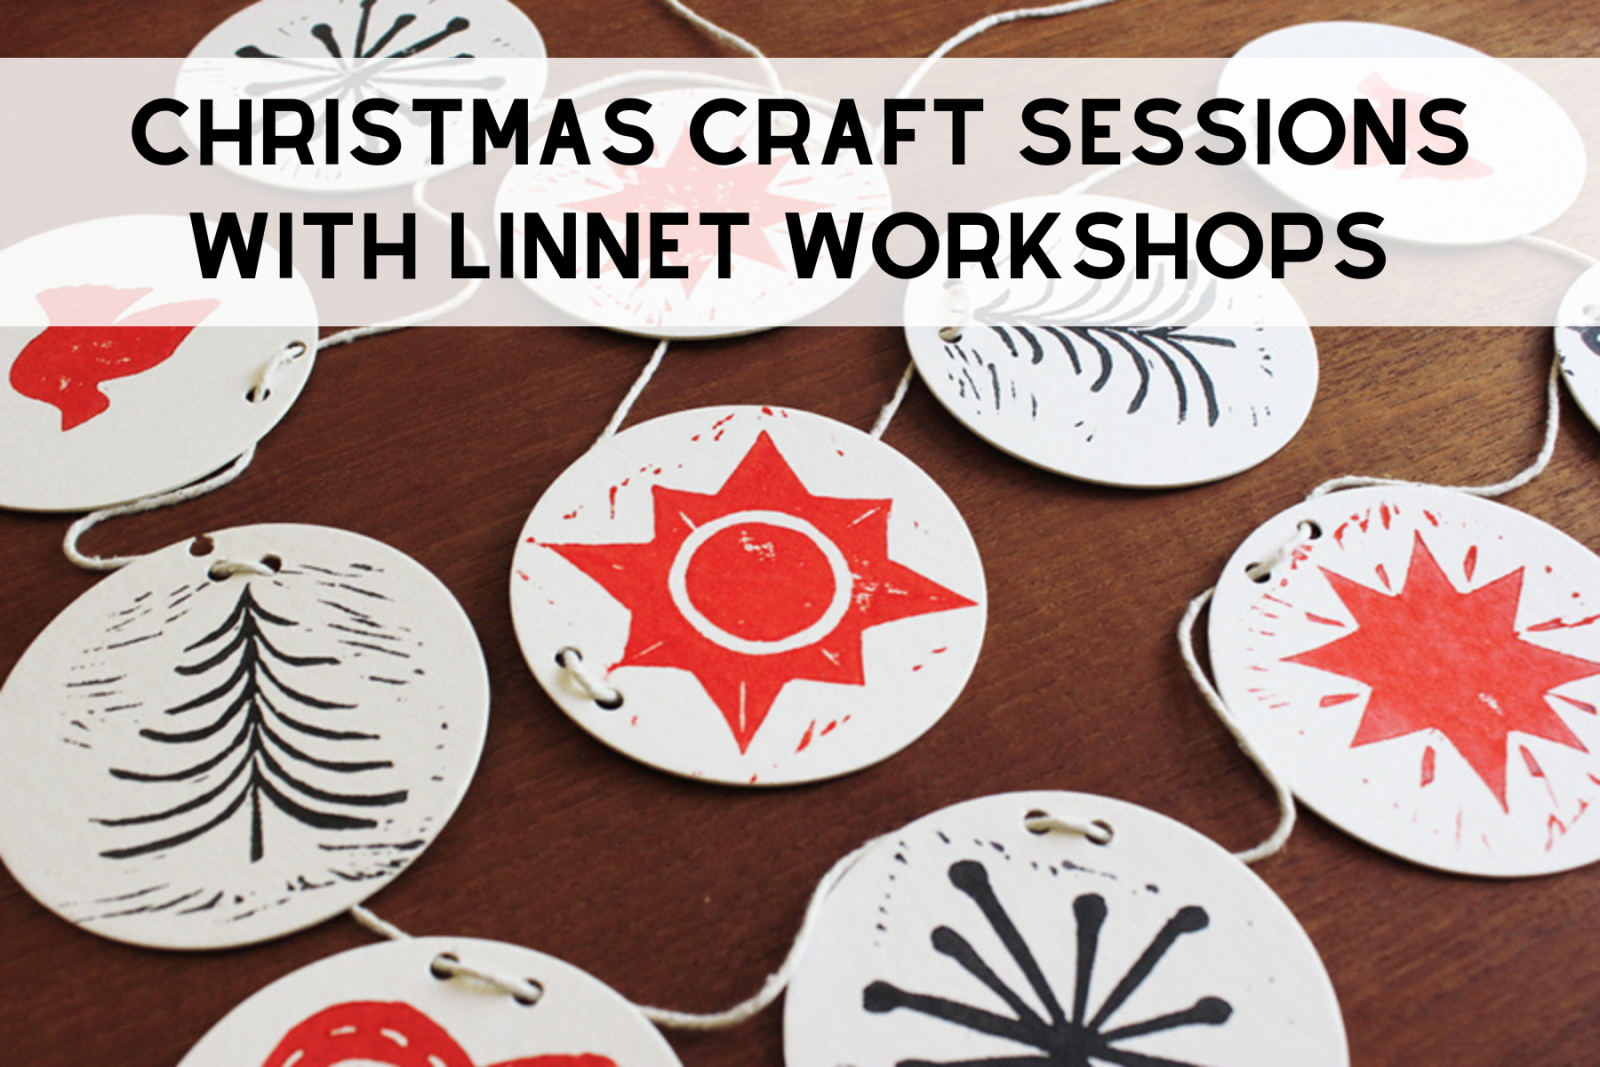 Christmas Craft Sessions with Linnet Workshops